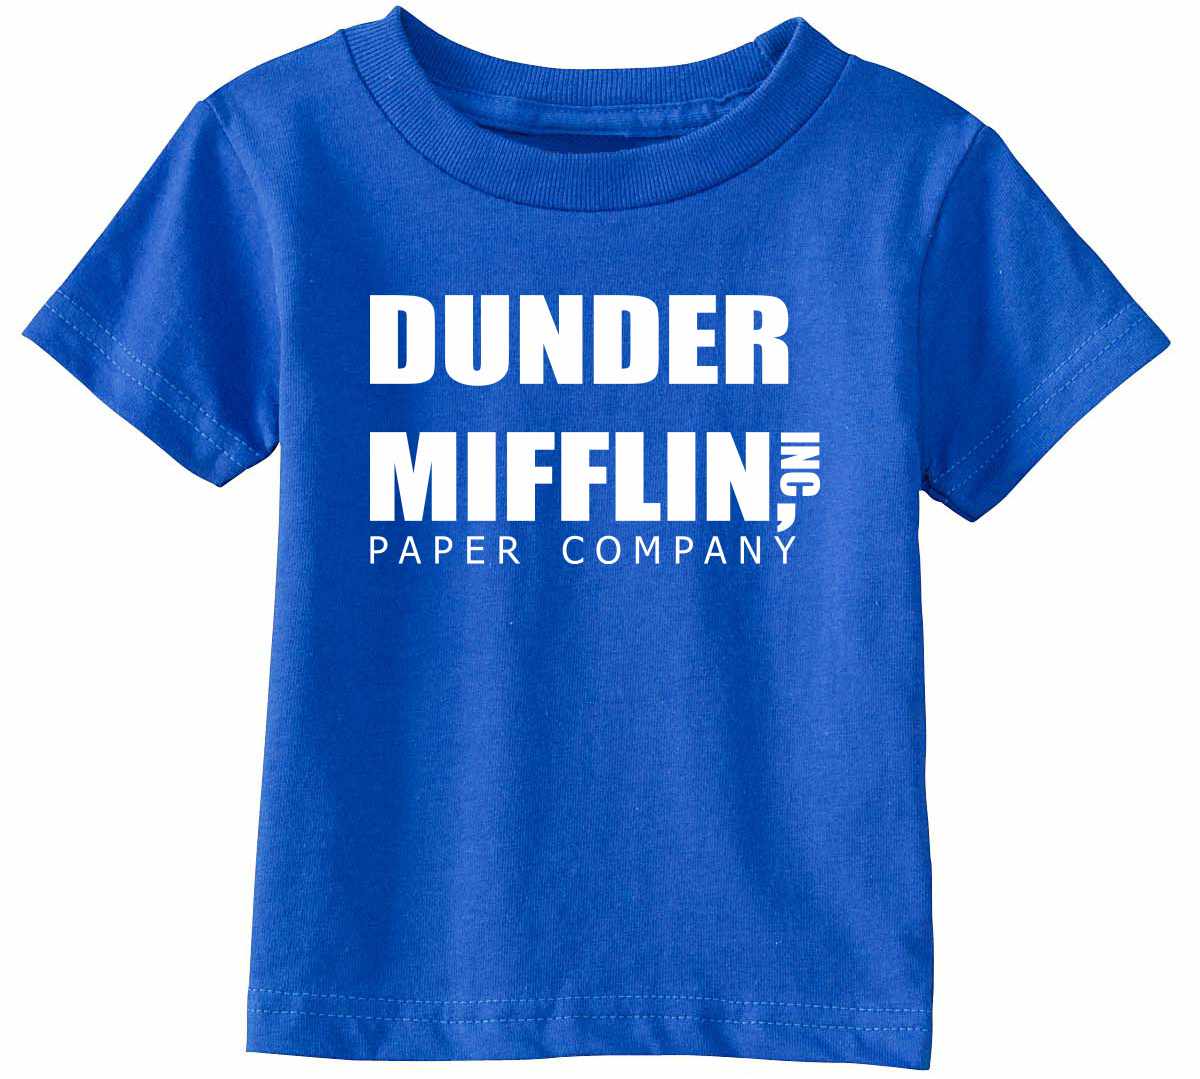 Dunder Mifflin Paper Company on Infant-Toddler T-Shirt in 13 colors – South  Horizon T-Shirt Company